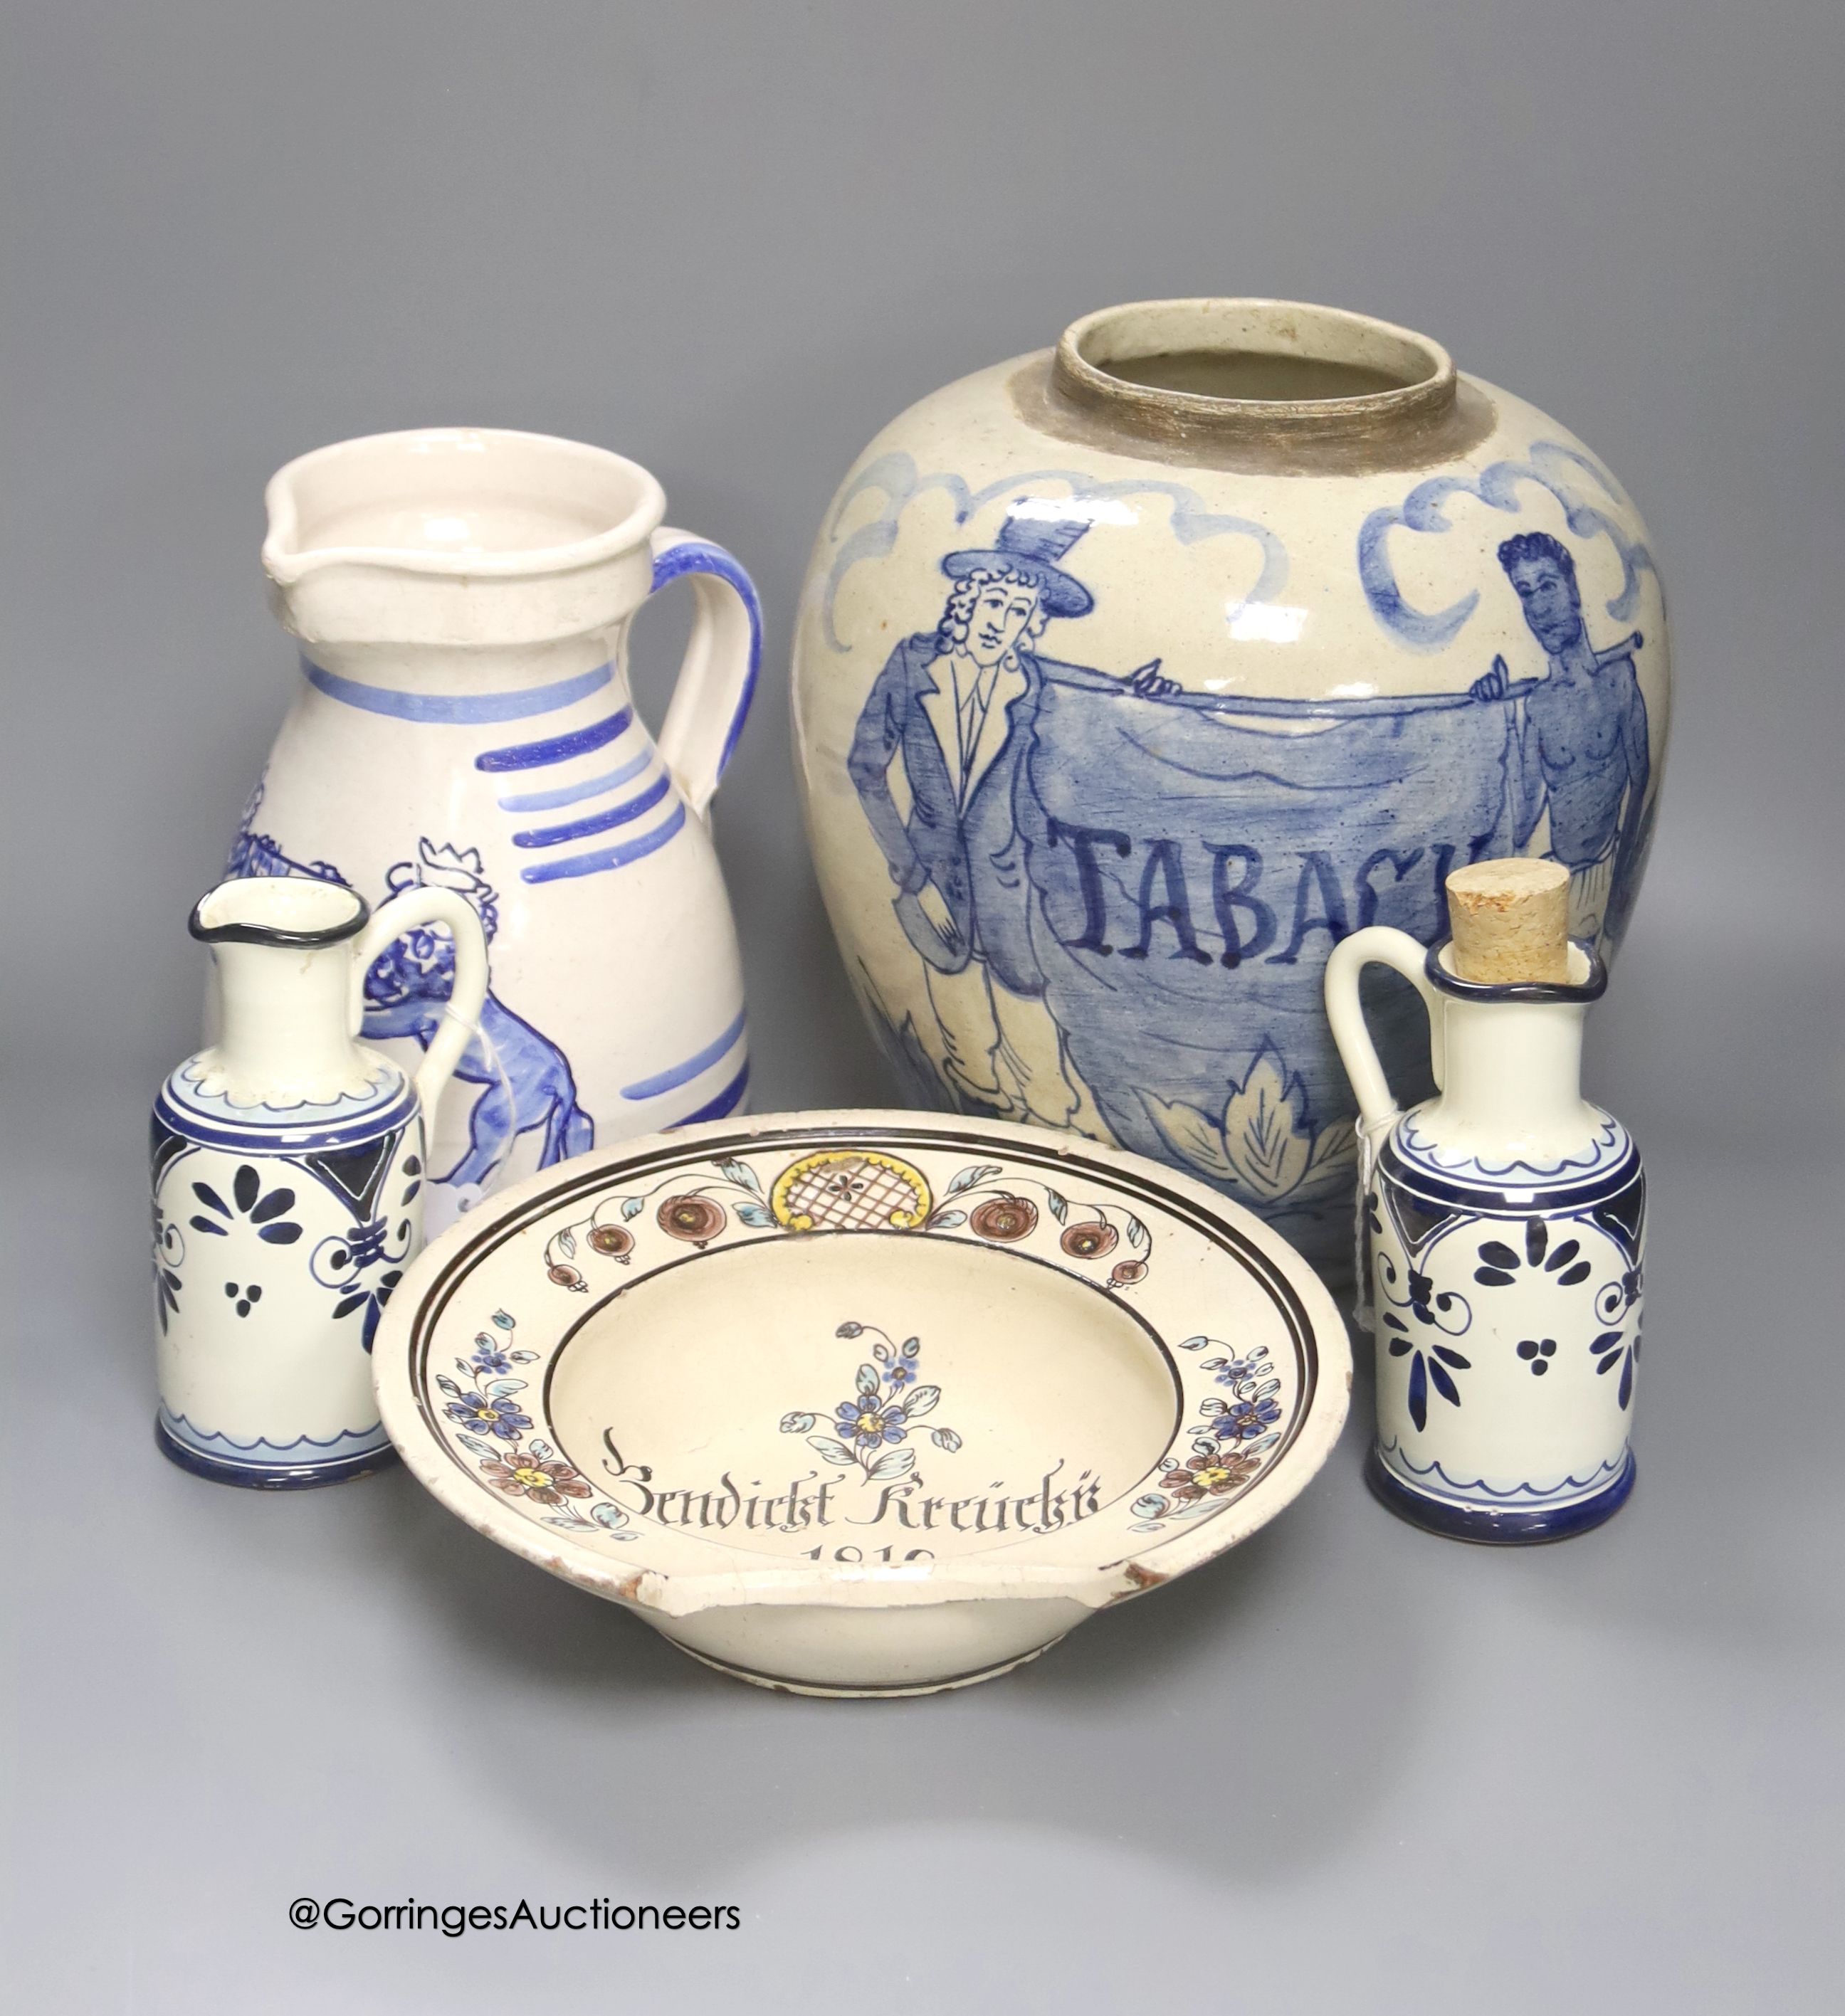 A tin-glazed terracotta barber's bowl dated 1819, a large ovoid eathenware ‘Taback’ jar and three